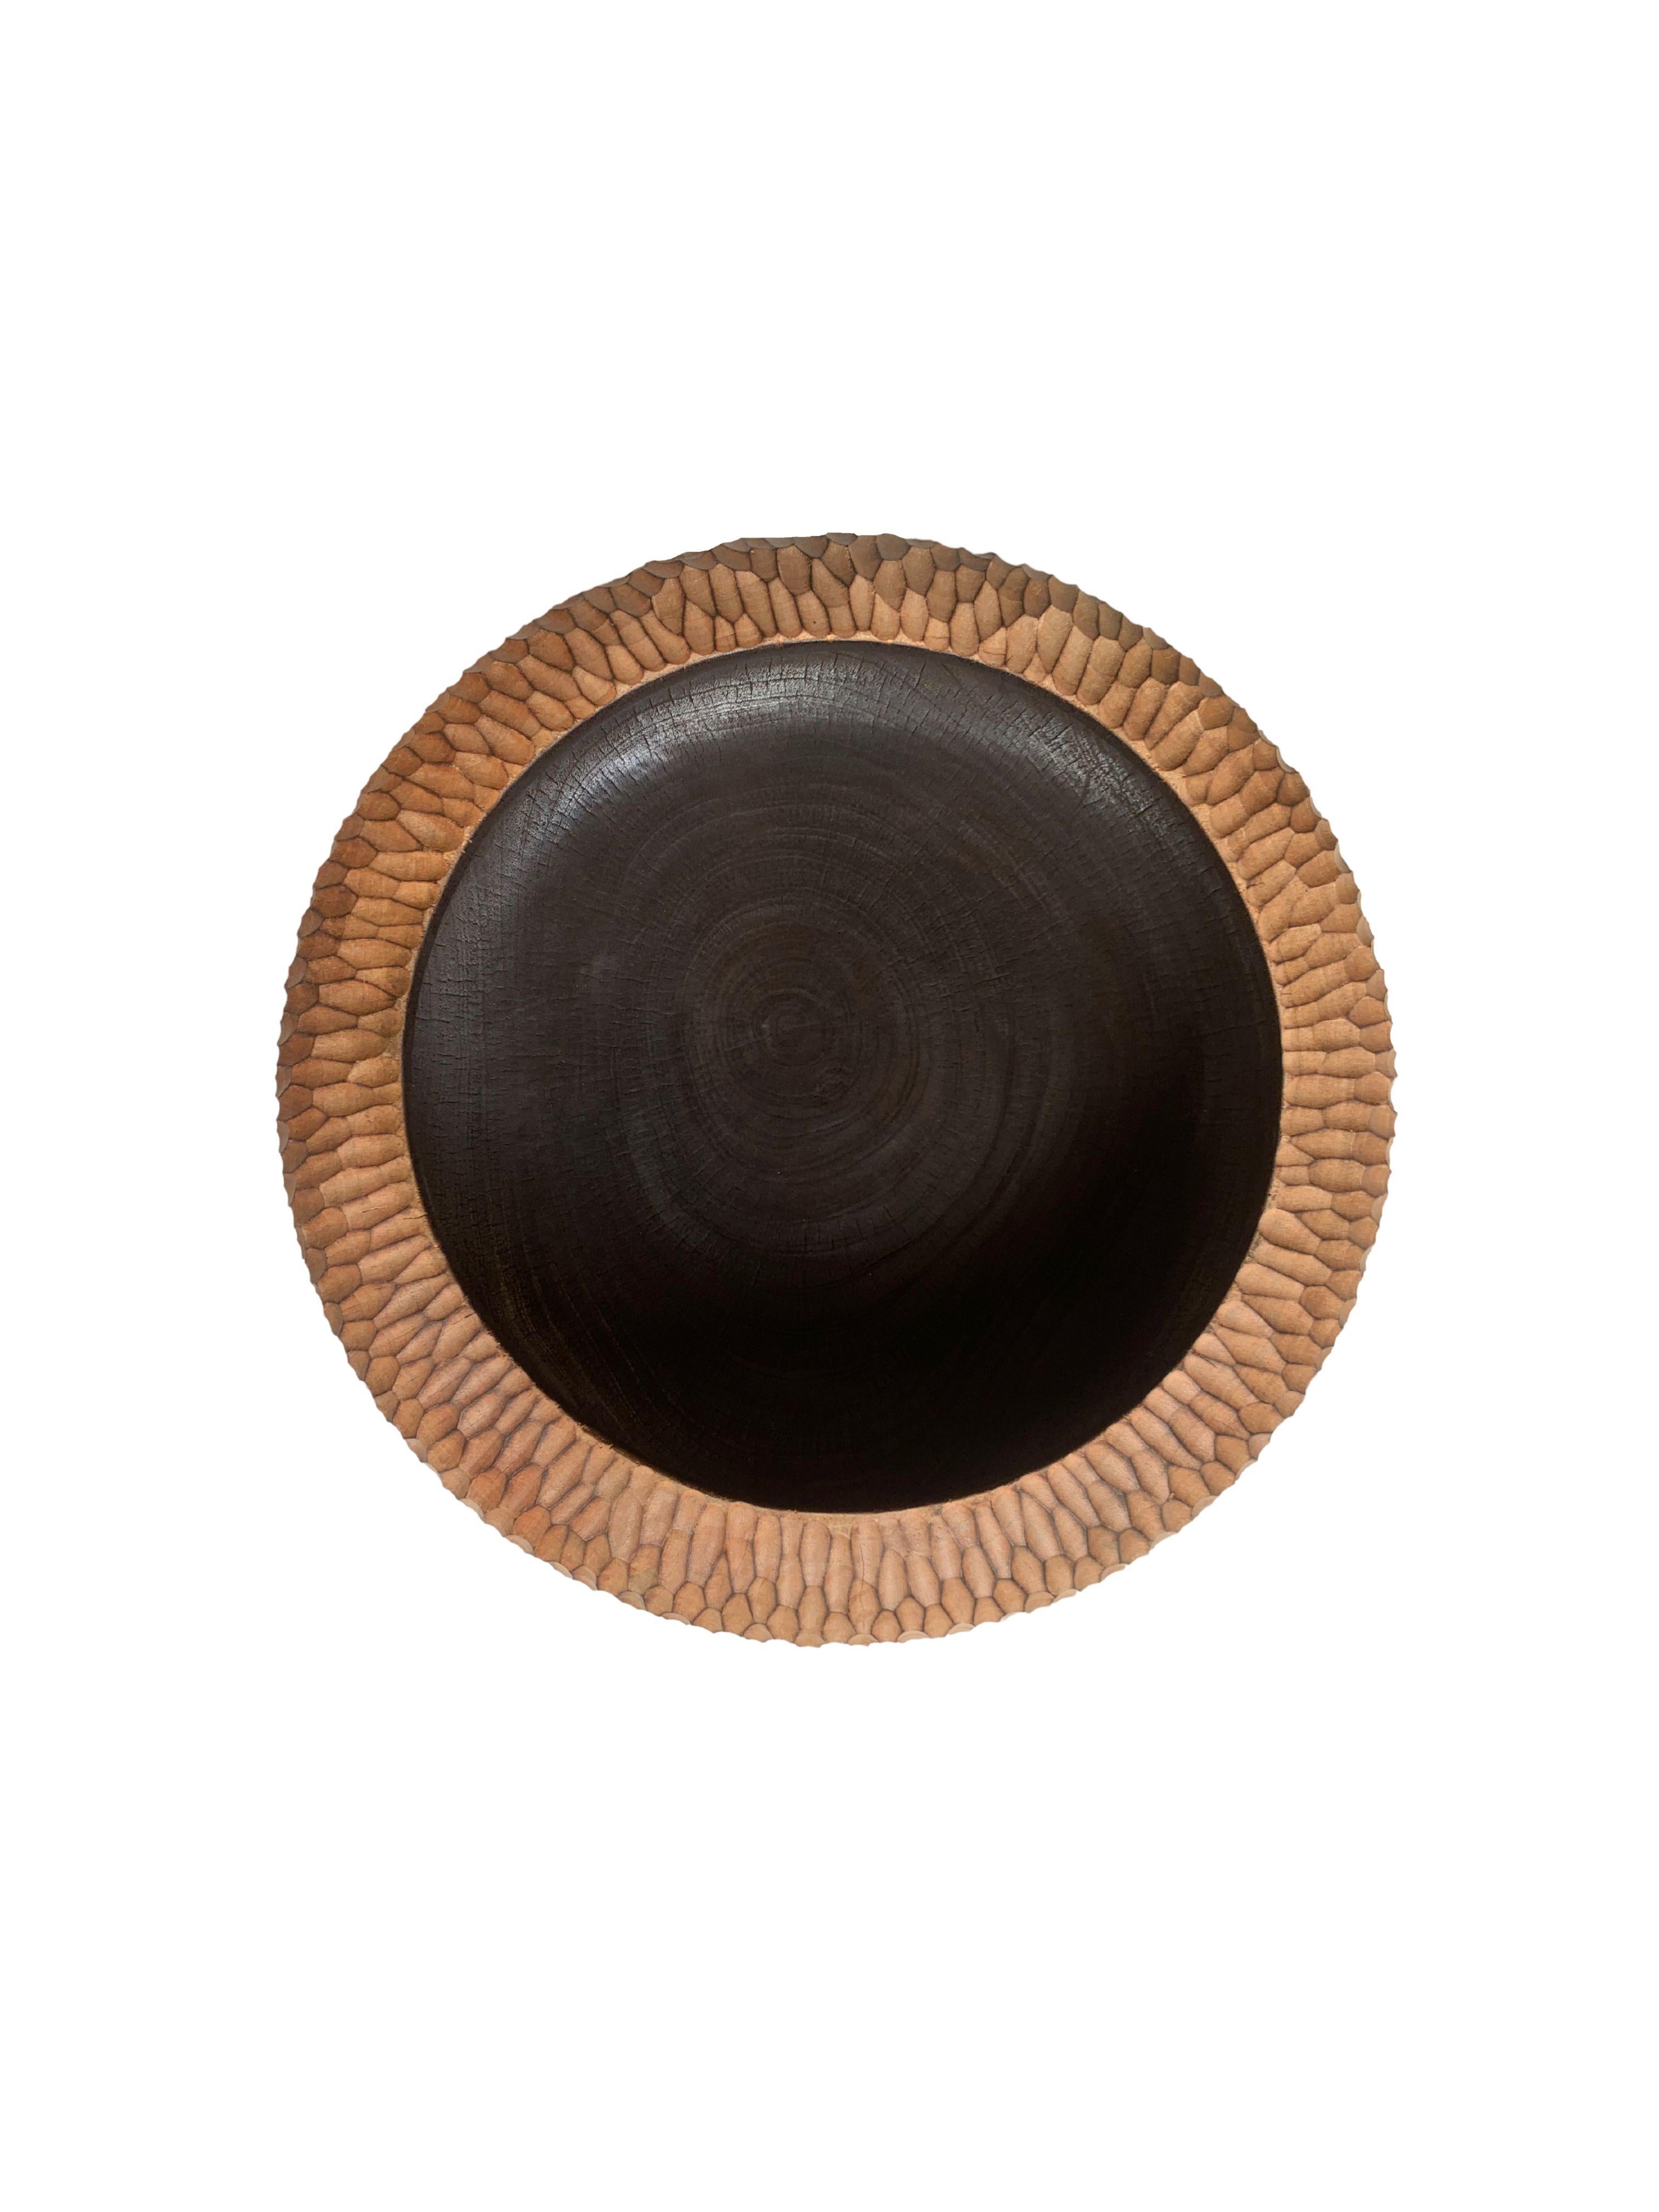 Indonesian Solid Mango Wood Bowl with Hand-Hewn Detailing and Burnt Detailing For Sale